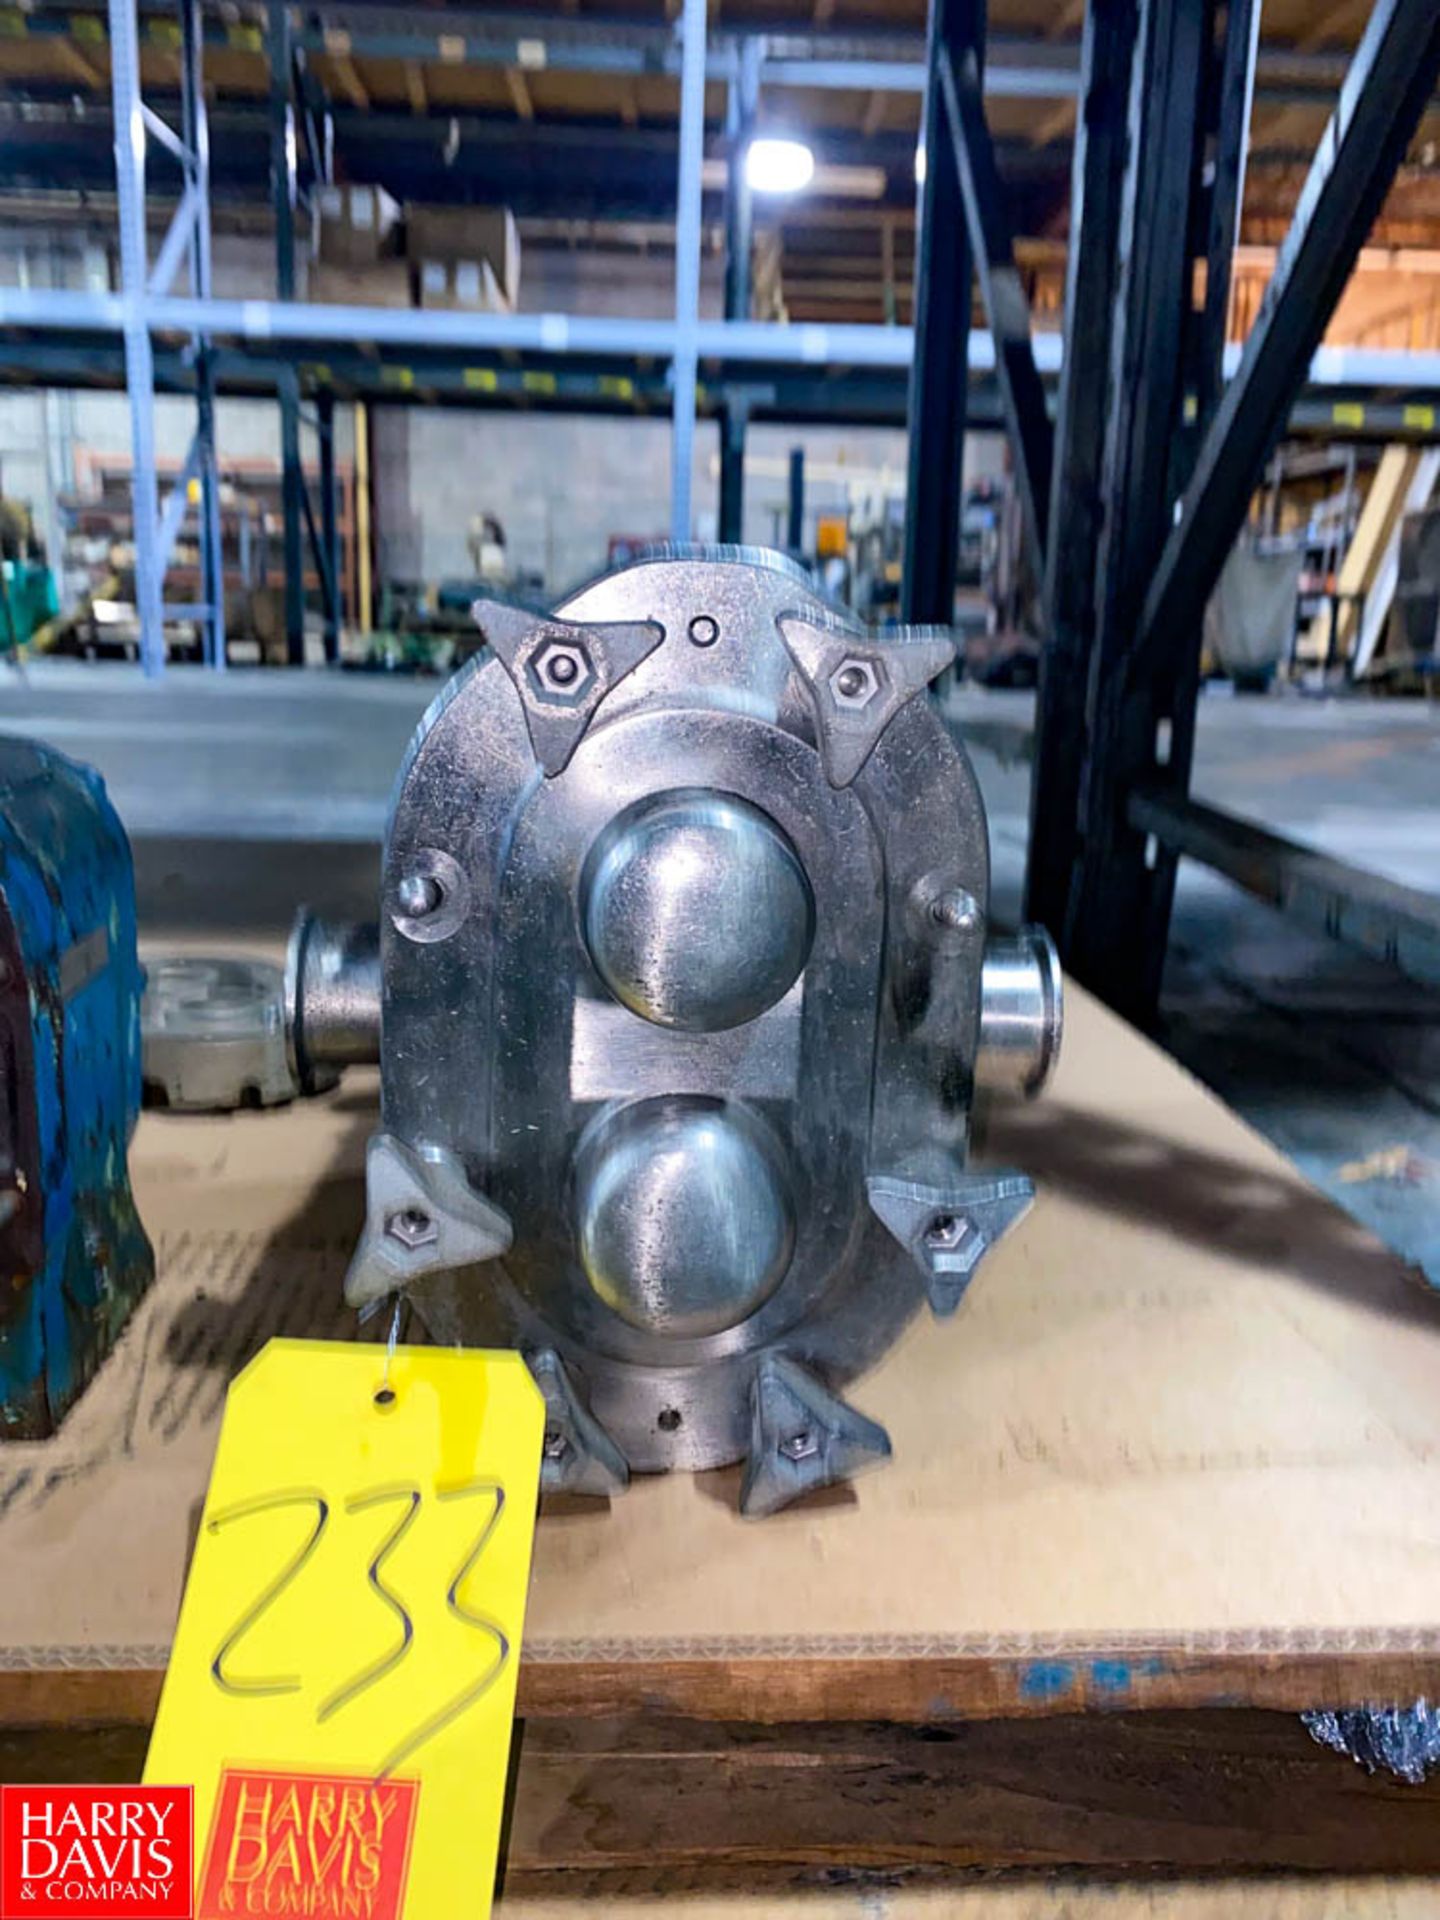 Positive Displacement Pump Pump Heads - Including: Waukesha Cherry-Burrell , Model: 030 and (3) - Image 2 of 2